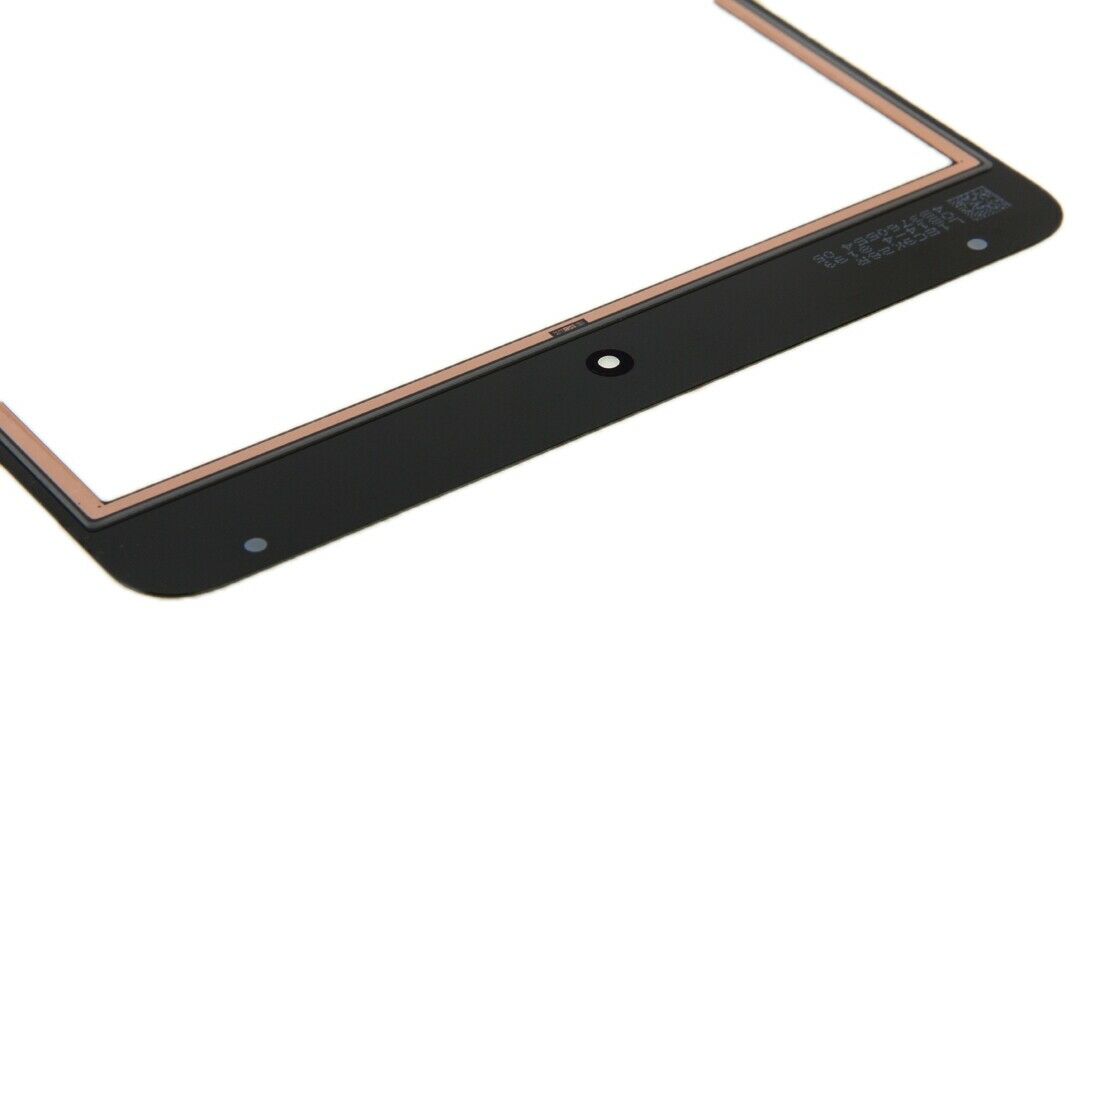 Apple iPad Mini 4 Replacement Touch Screen Digitizer - Black for [product_price] - First Help Tech